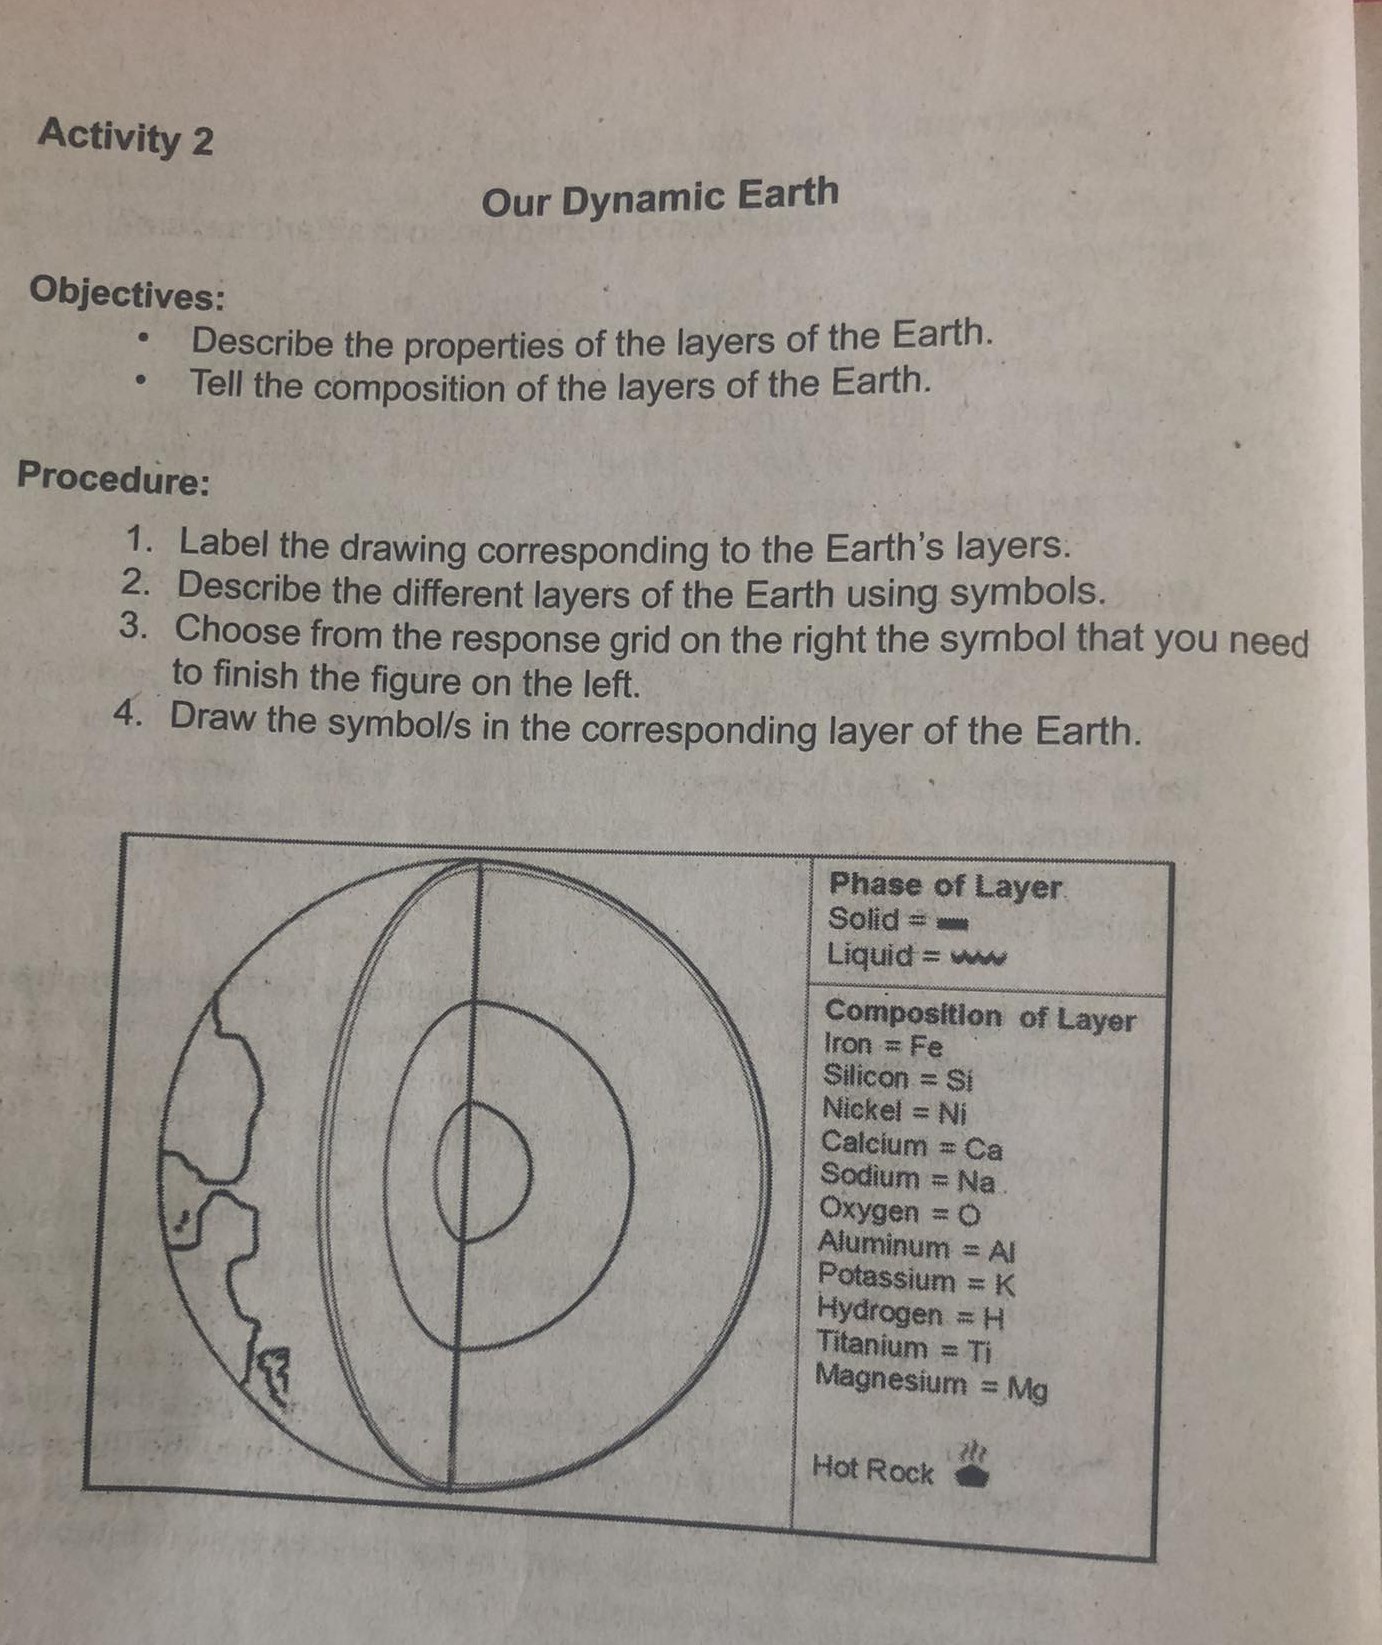 Earth's Layers: Crust, Mantle & Core, Seismic Discontinuities - PMF IAS